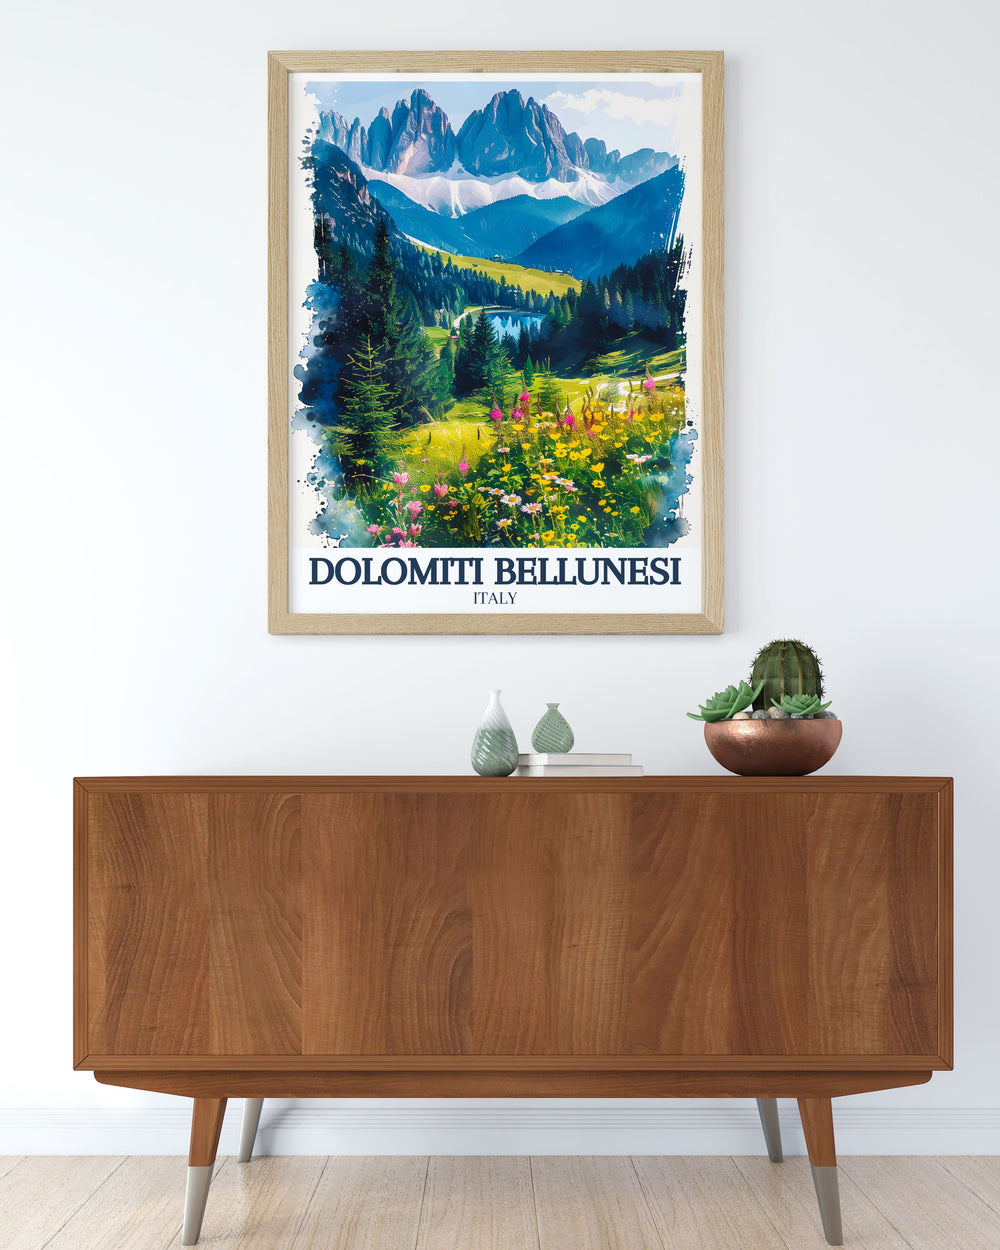 Vintage travel print of the Dolomite range showcasing the rugged charm and natural splendor of the Dolomiti Bellunesi ideal for adding a touch of nostalgia to your space.